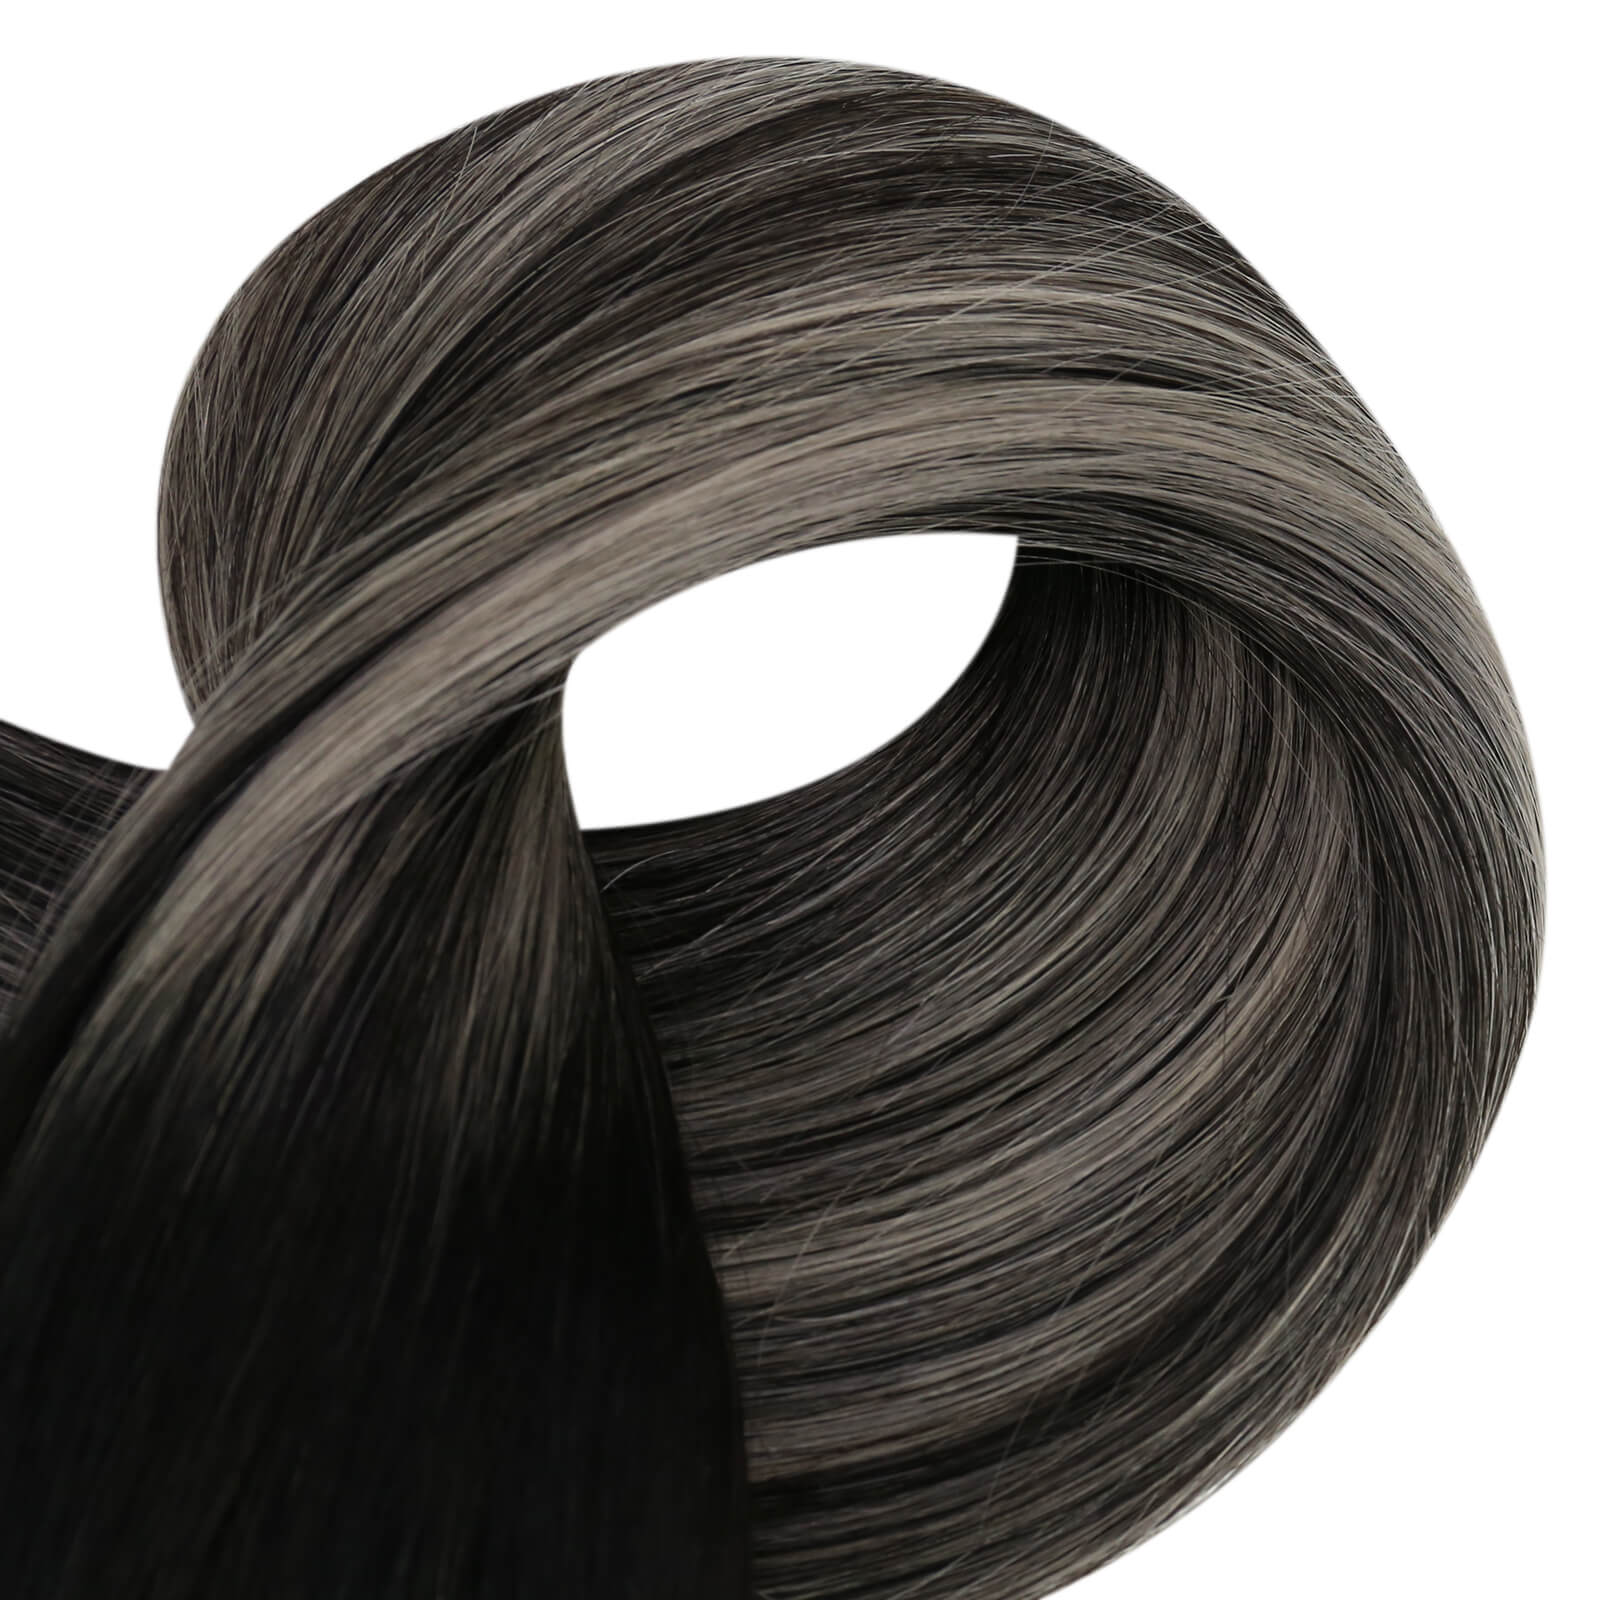 Human hair sewing weft hair extensions